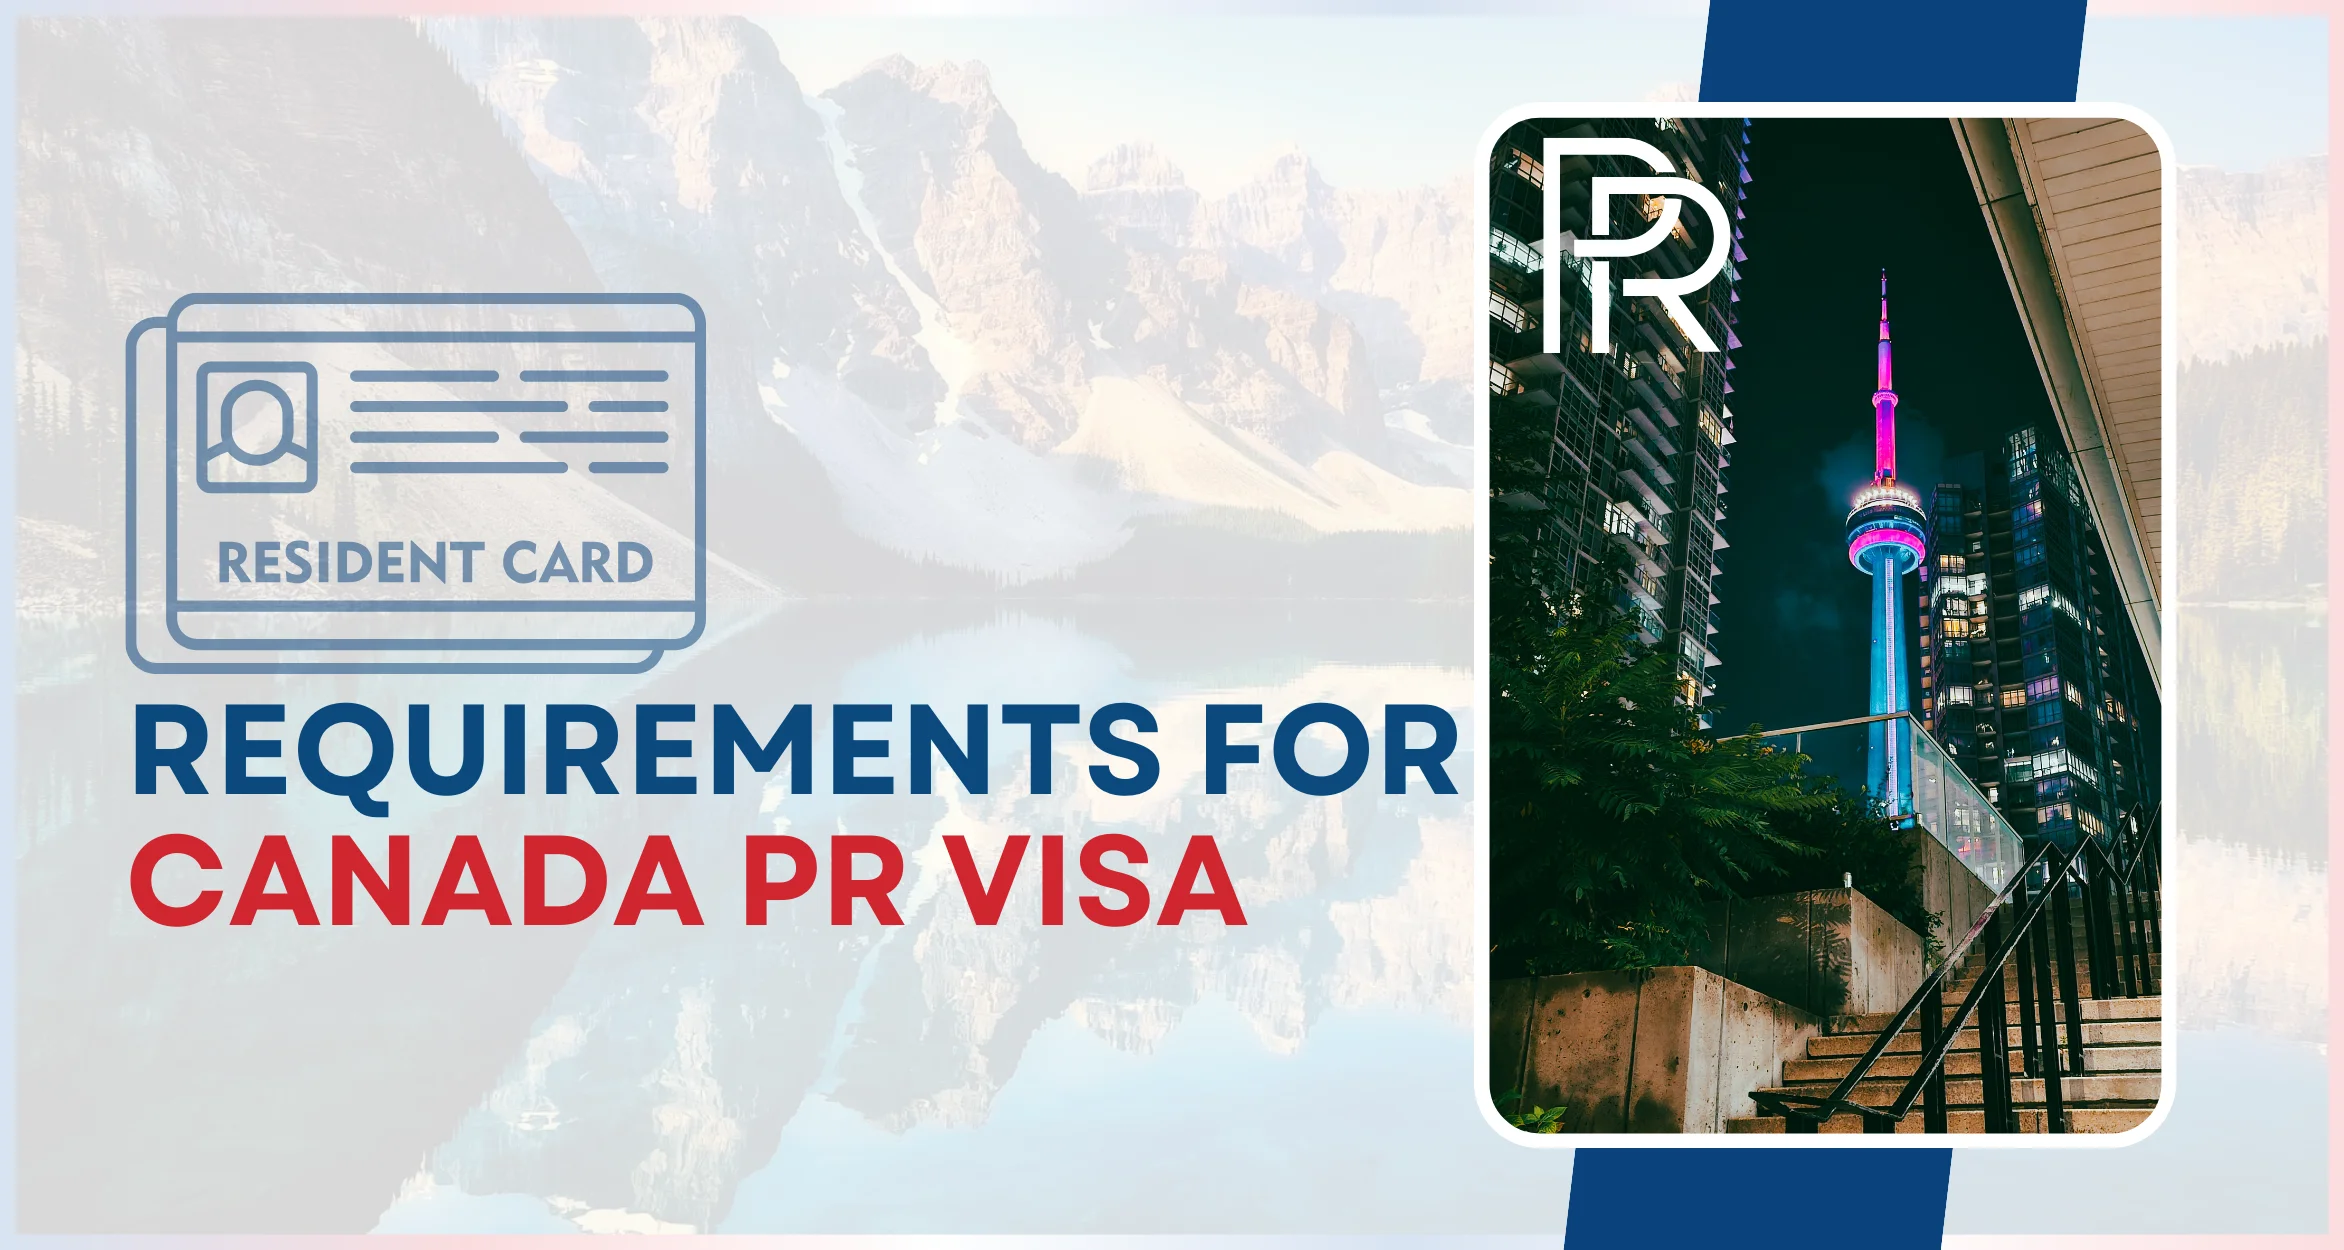 What are the requirements for Canada PR Visa?